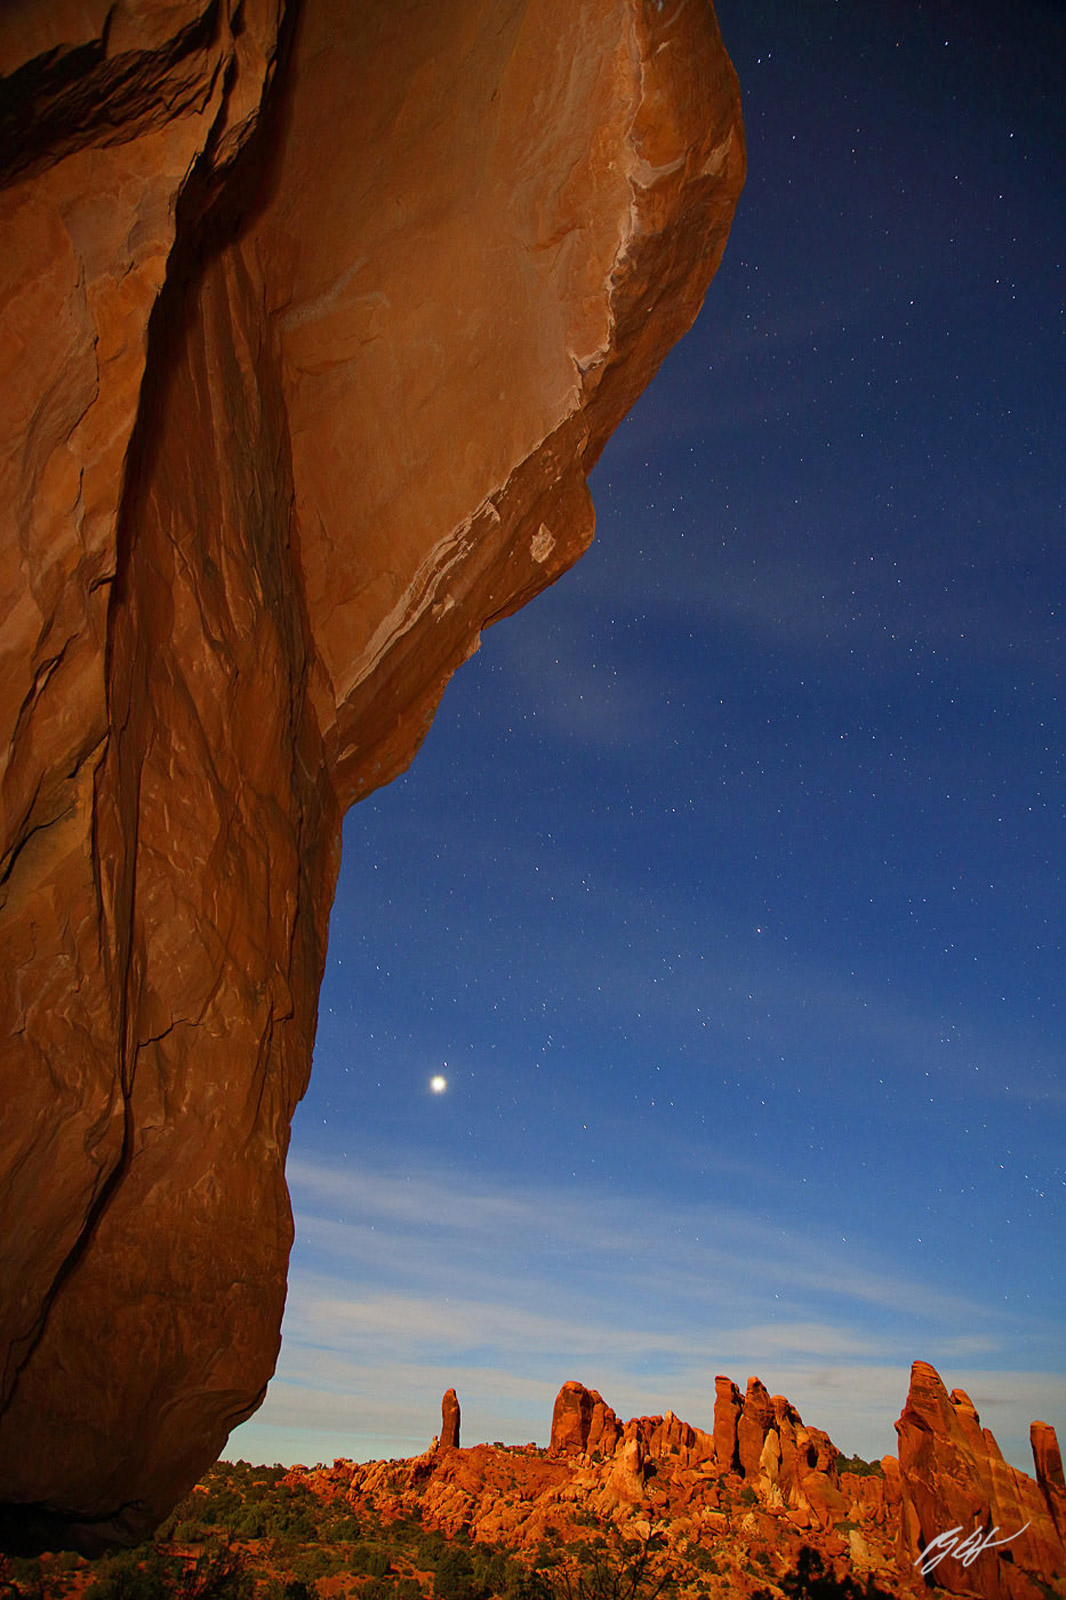 A Super Moon Lights up the Rock Formations in Arches National Park in Utah